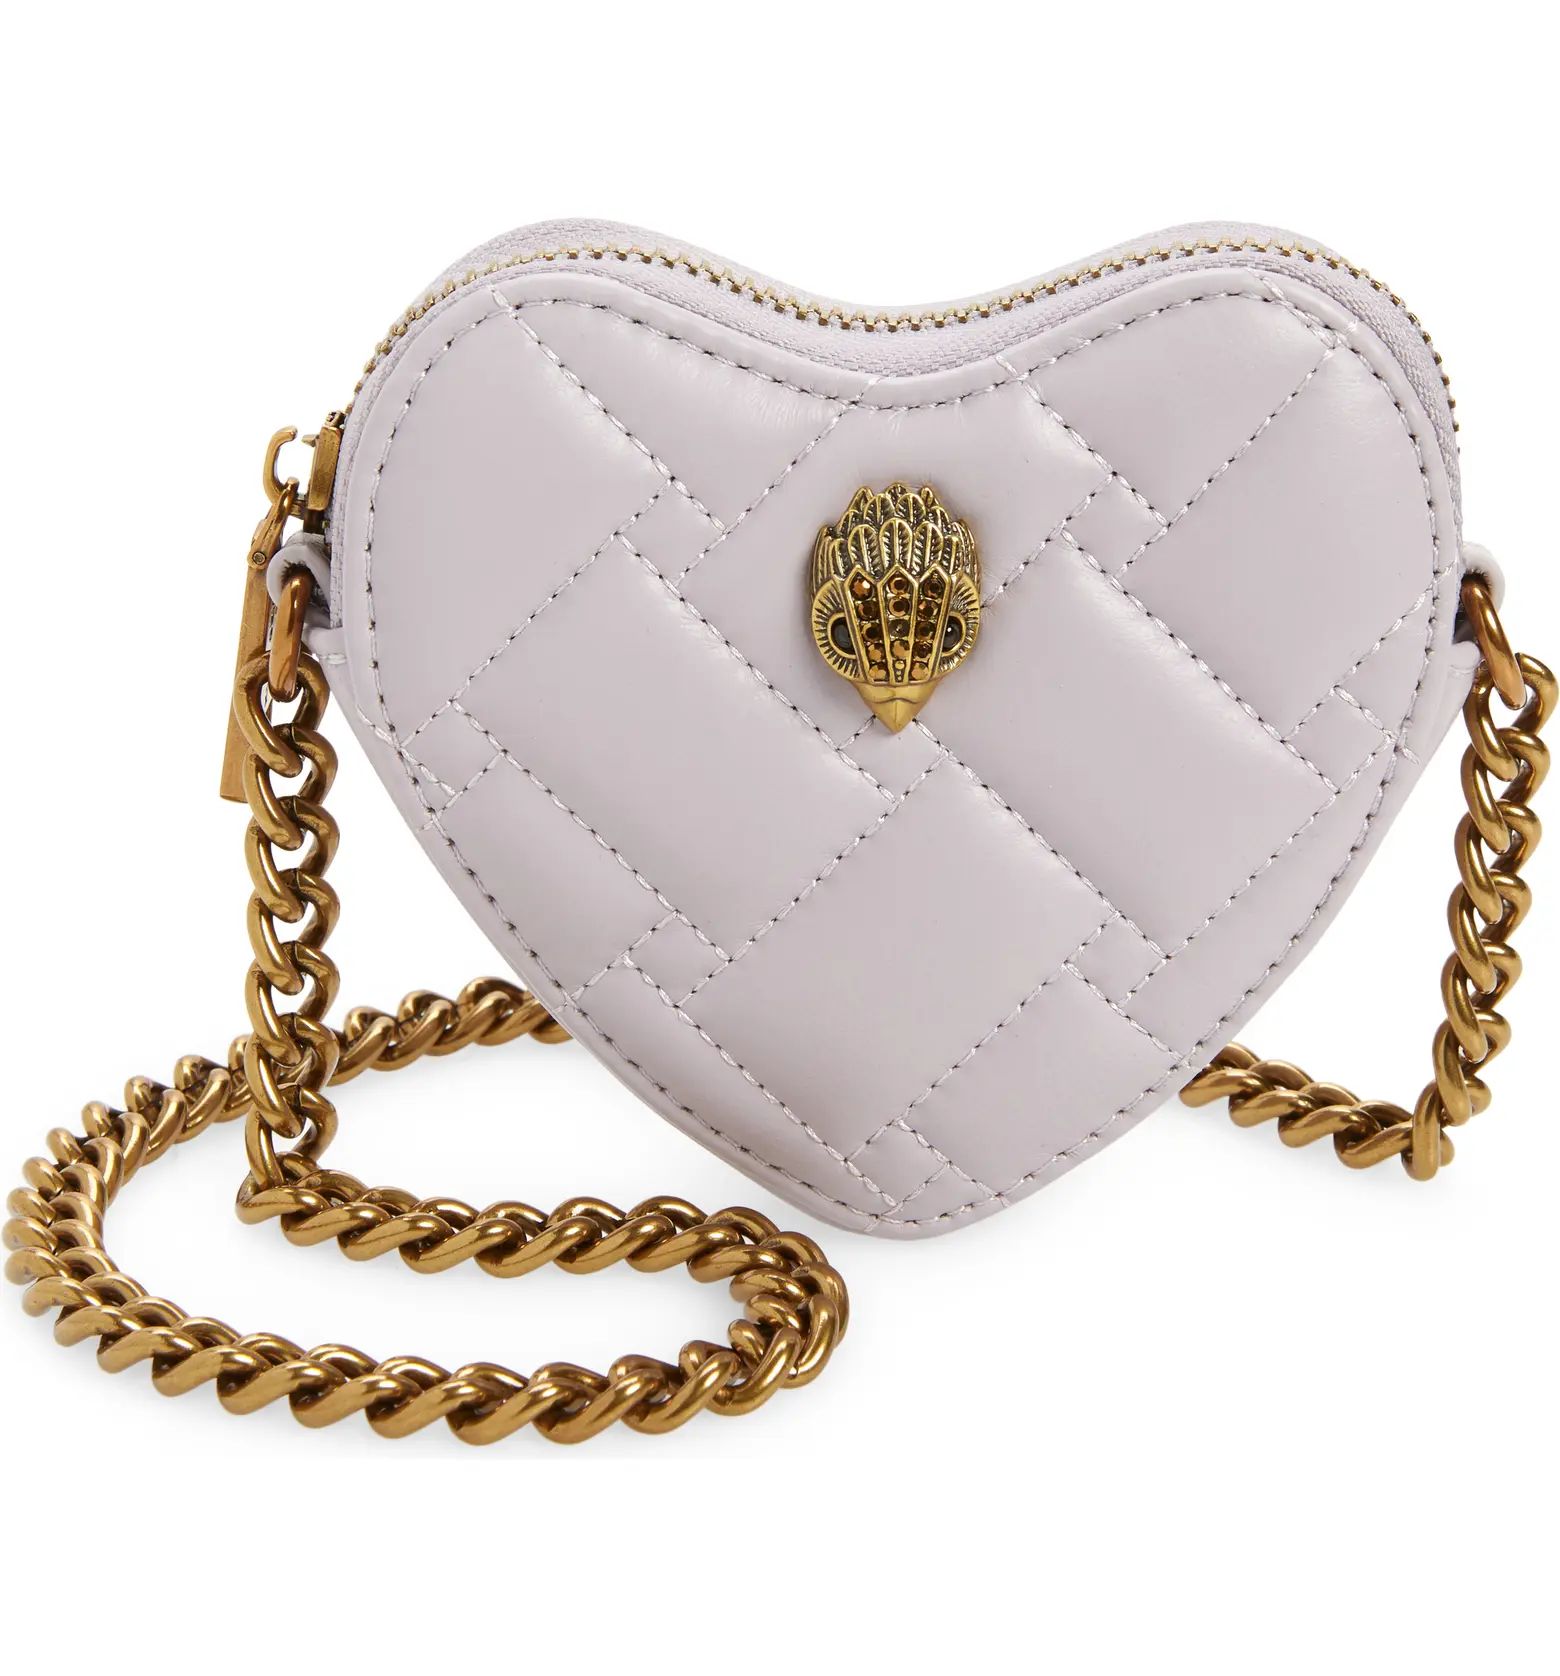 Micro Kensington Heart Quilted Leather Crossbody Bag | Nordstrom